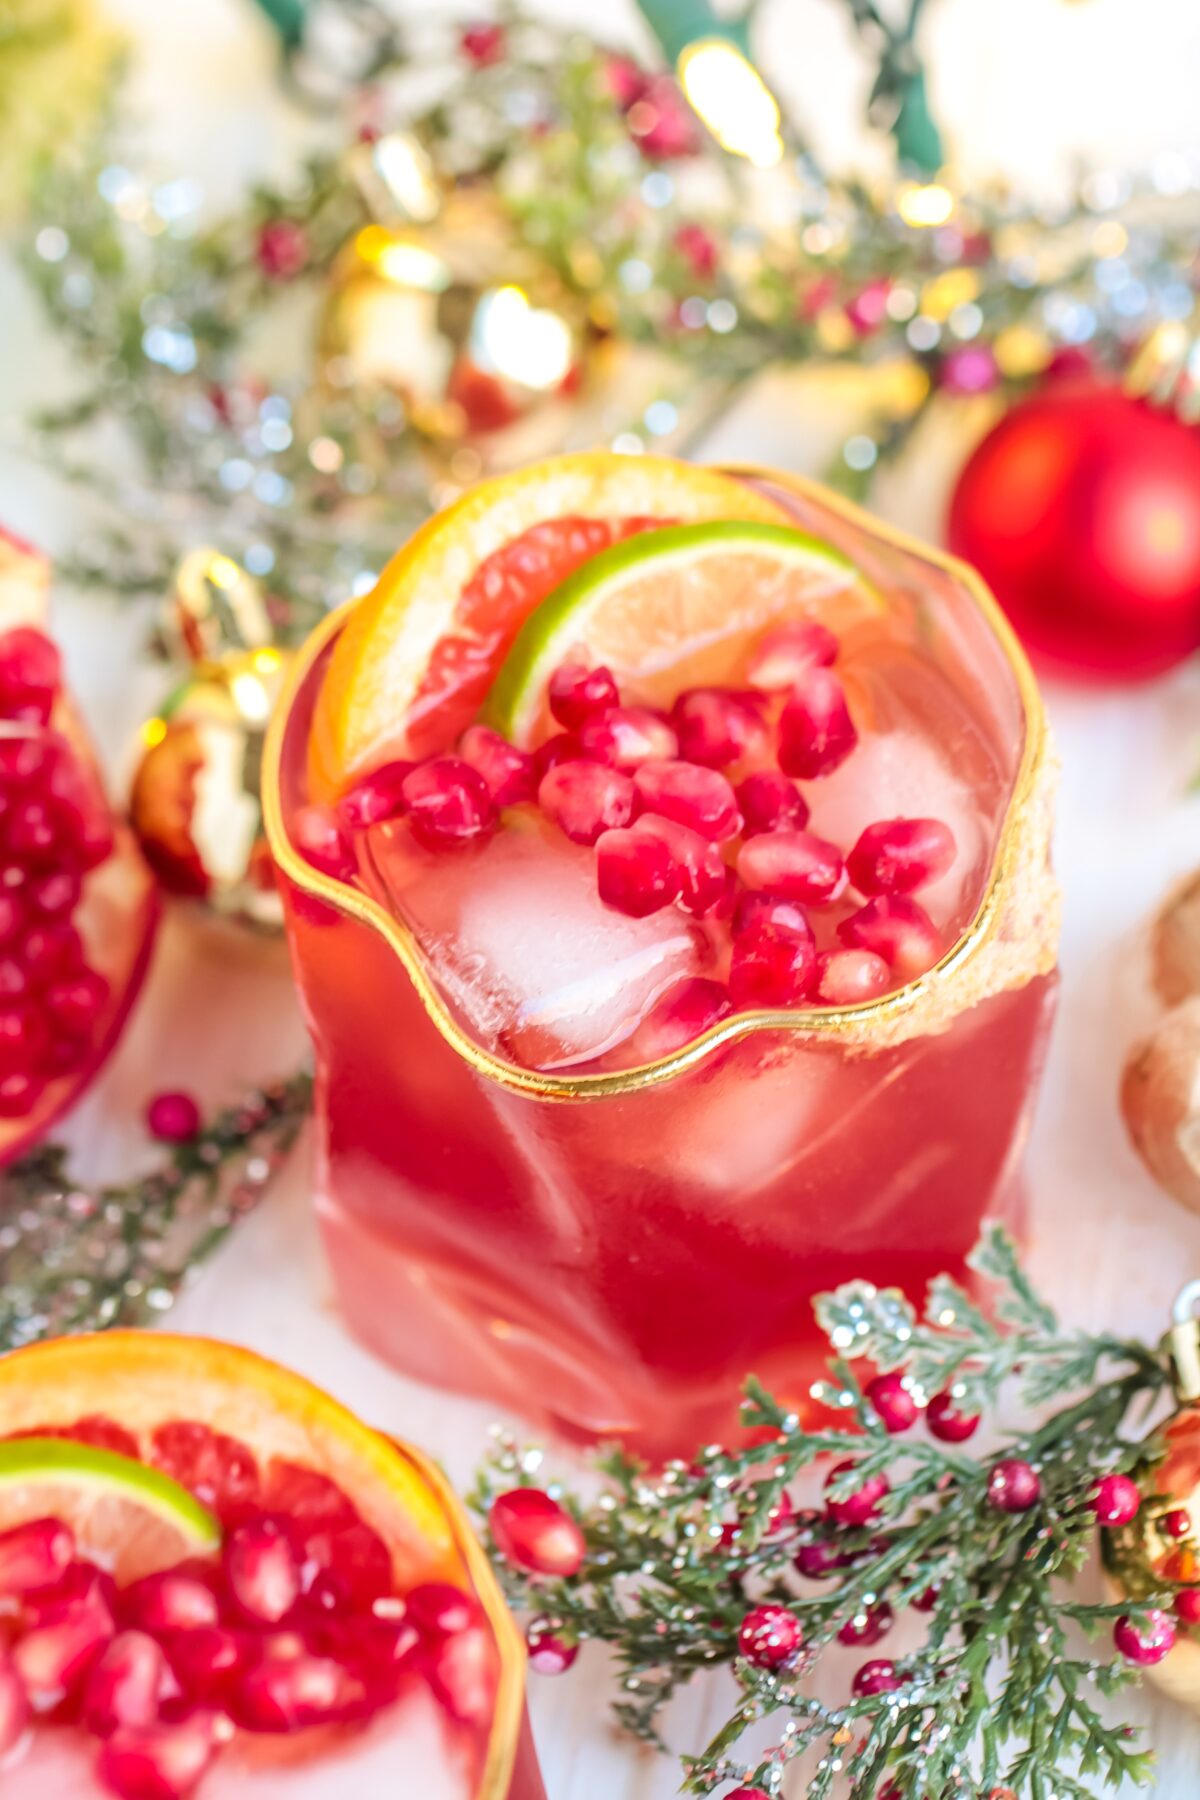 This festive pomegranate ginger paloma recipe is perfect for Christmas parties or gatherings! It's an easy to make ,holiday cocktail.